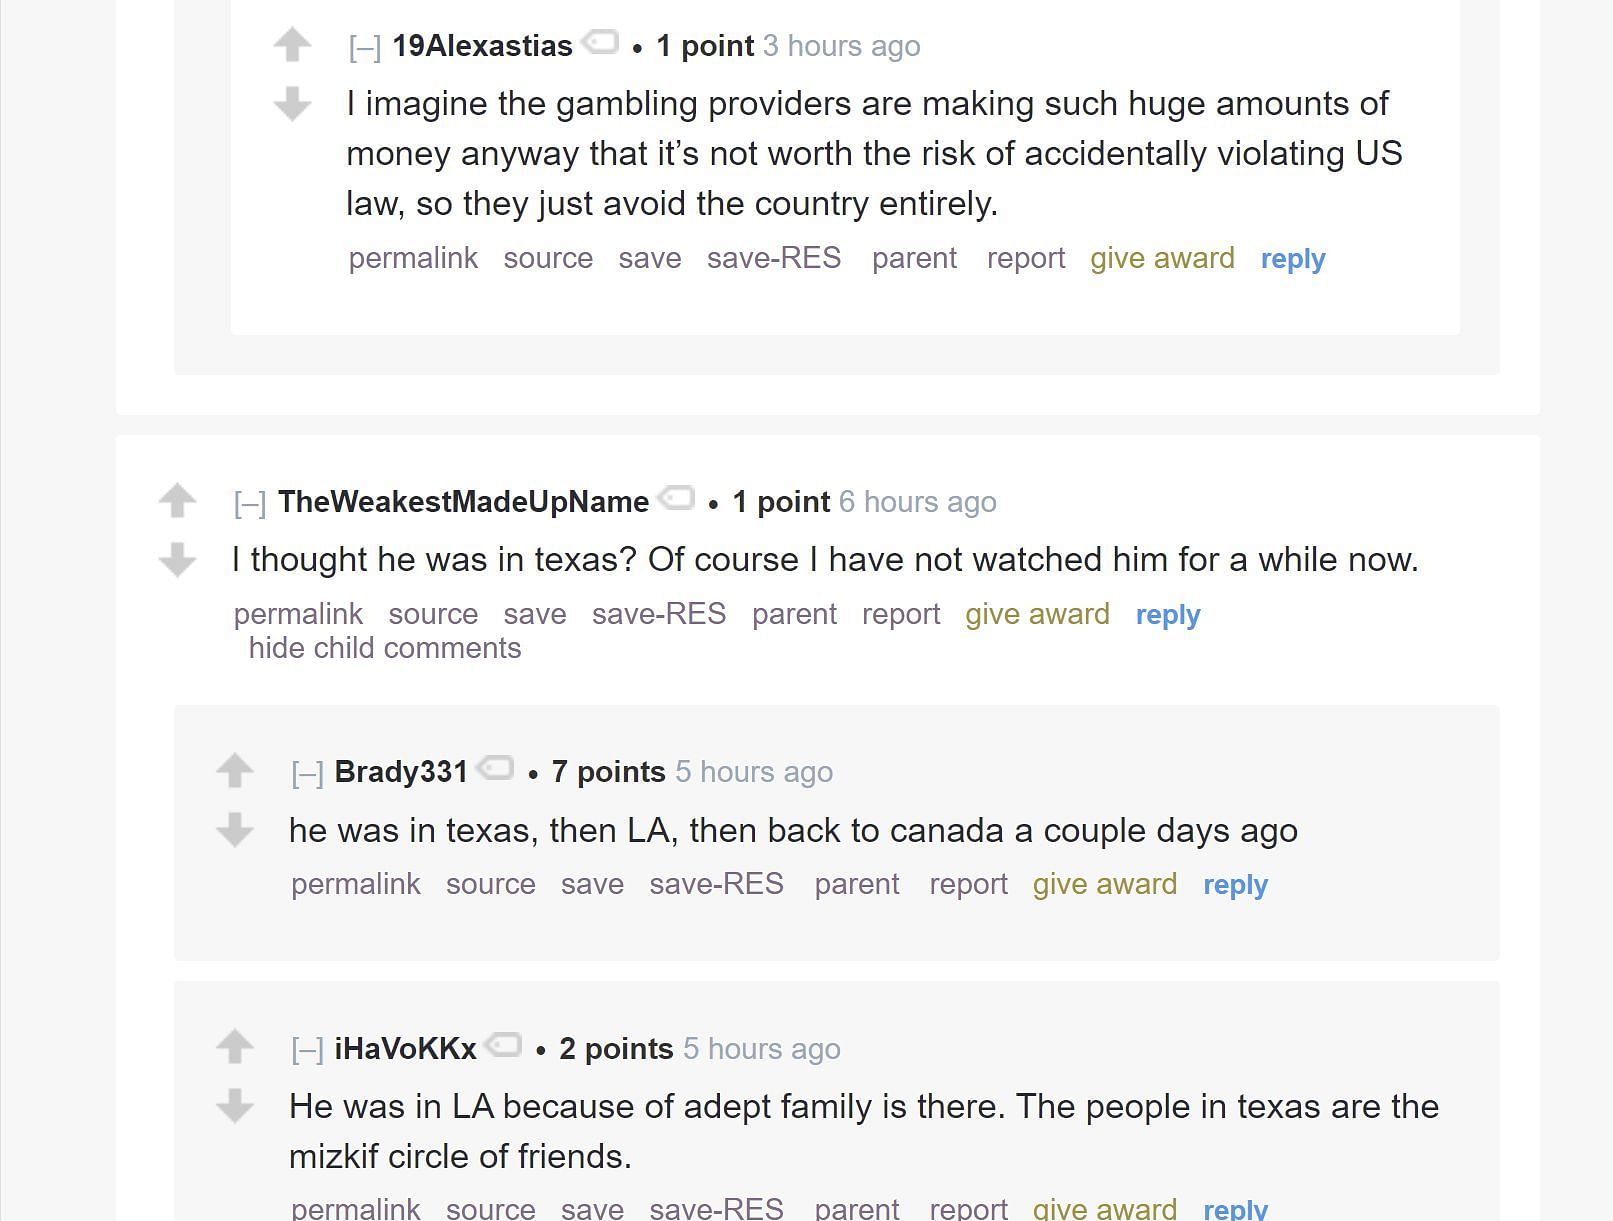 Fans discussing about law and policies surrounding gambling in North America 2/2 (Image via r/LivestreamFail, Reddit)